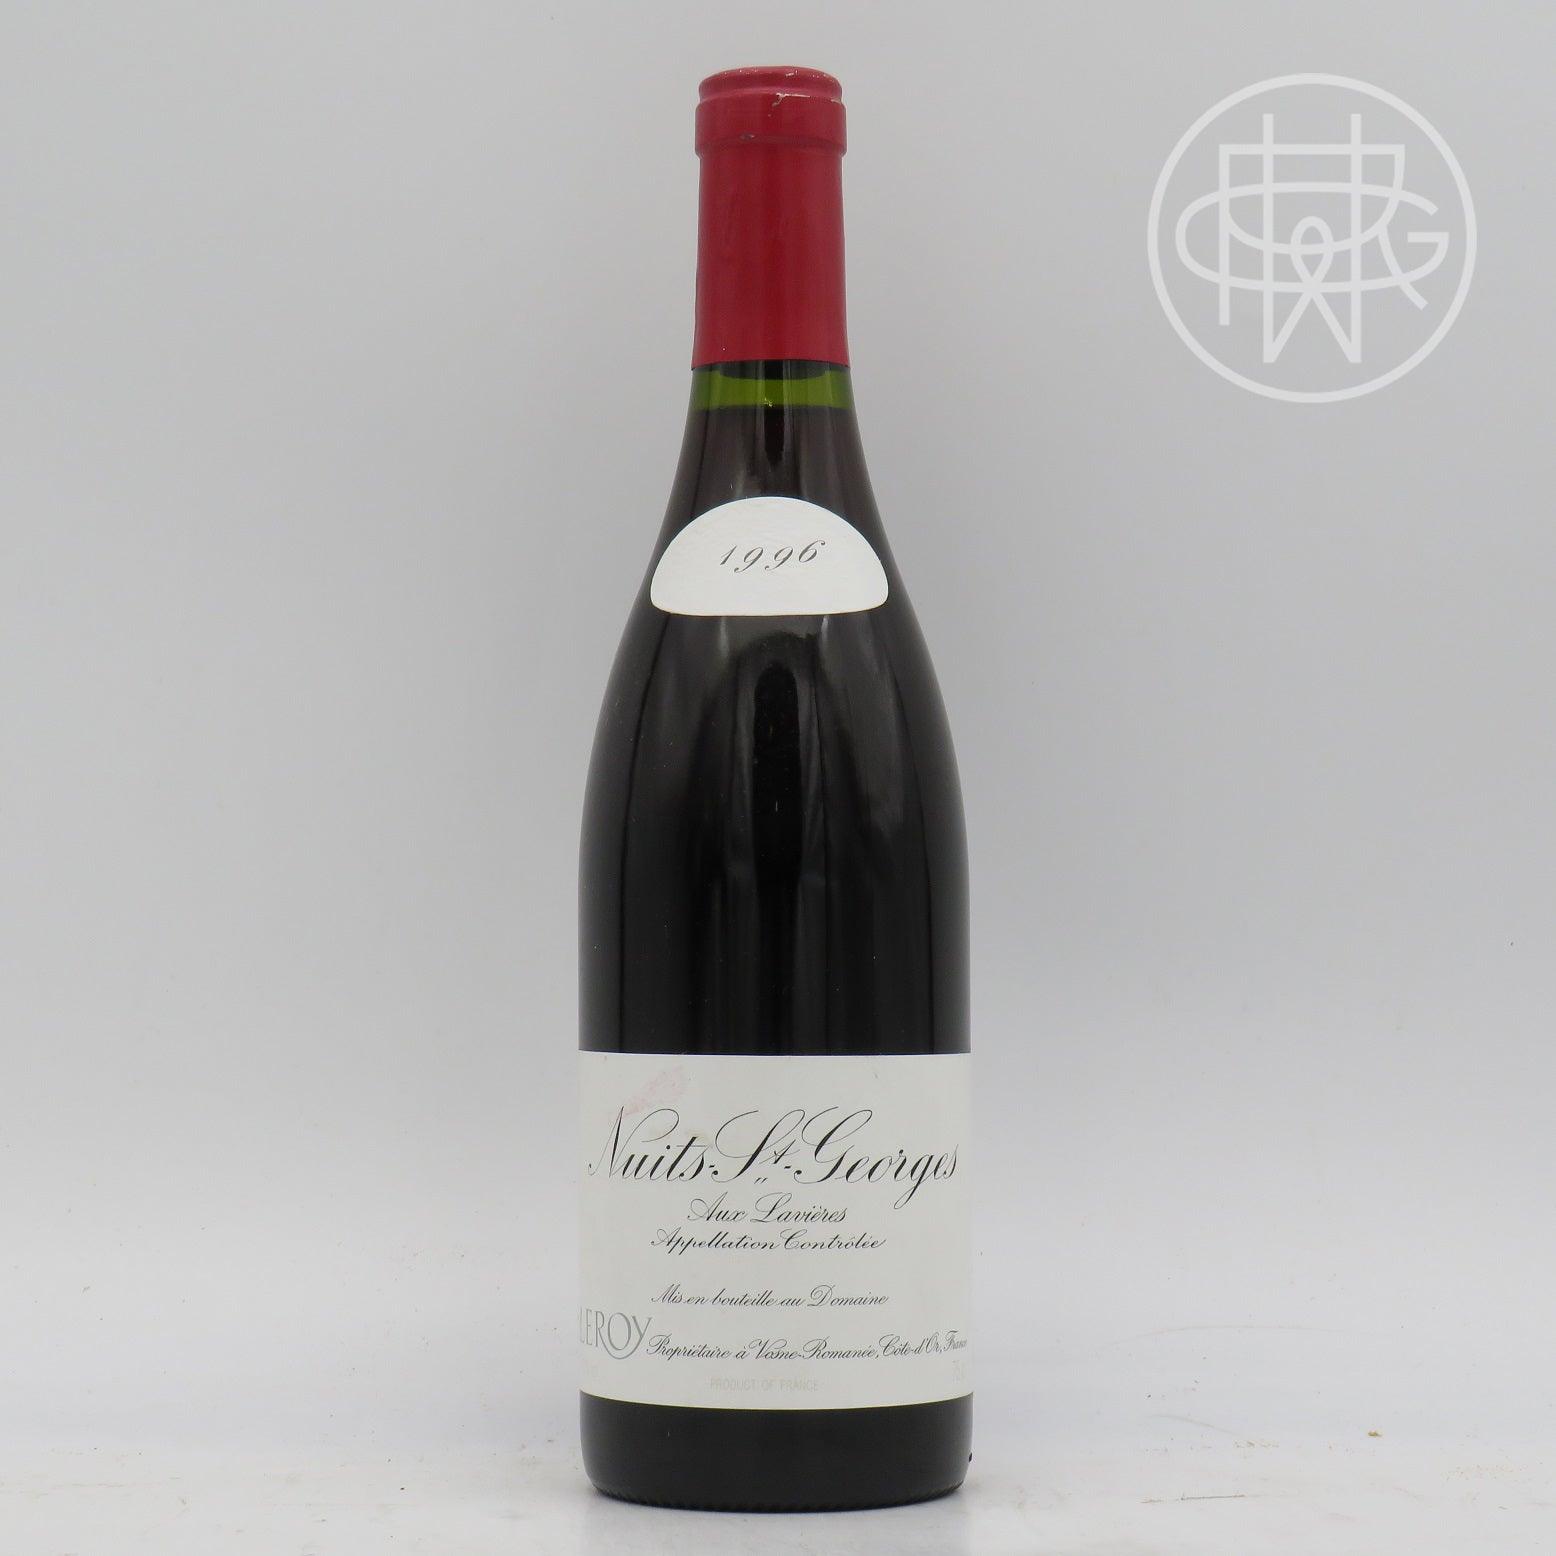 Leroy Nuits St. Georges Lavieres 1996 750mL (Slightly Soiled Label) - GRW Wine Collection